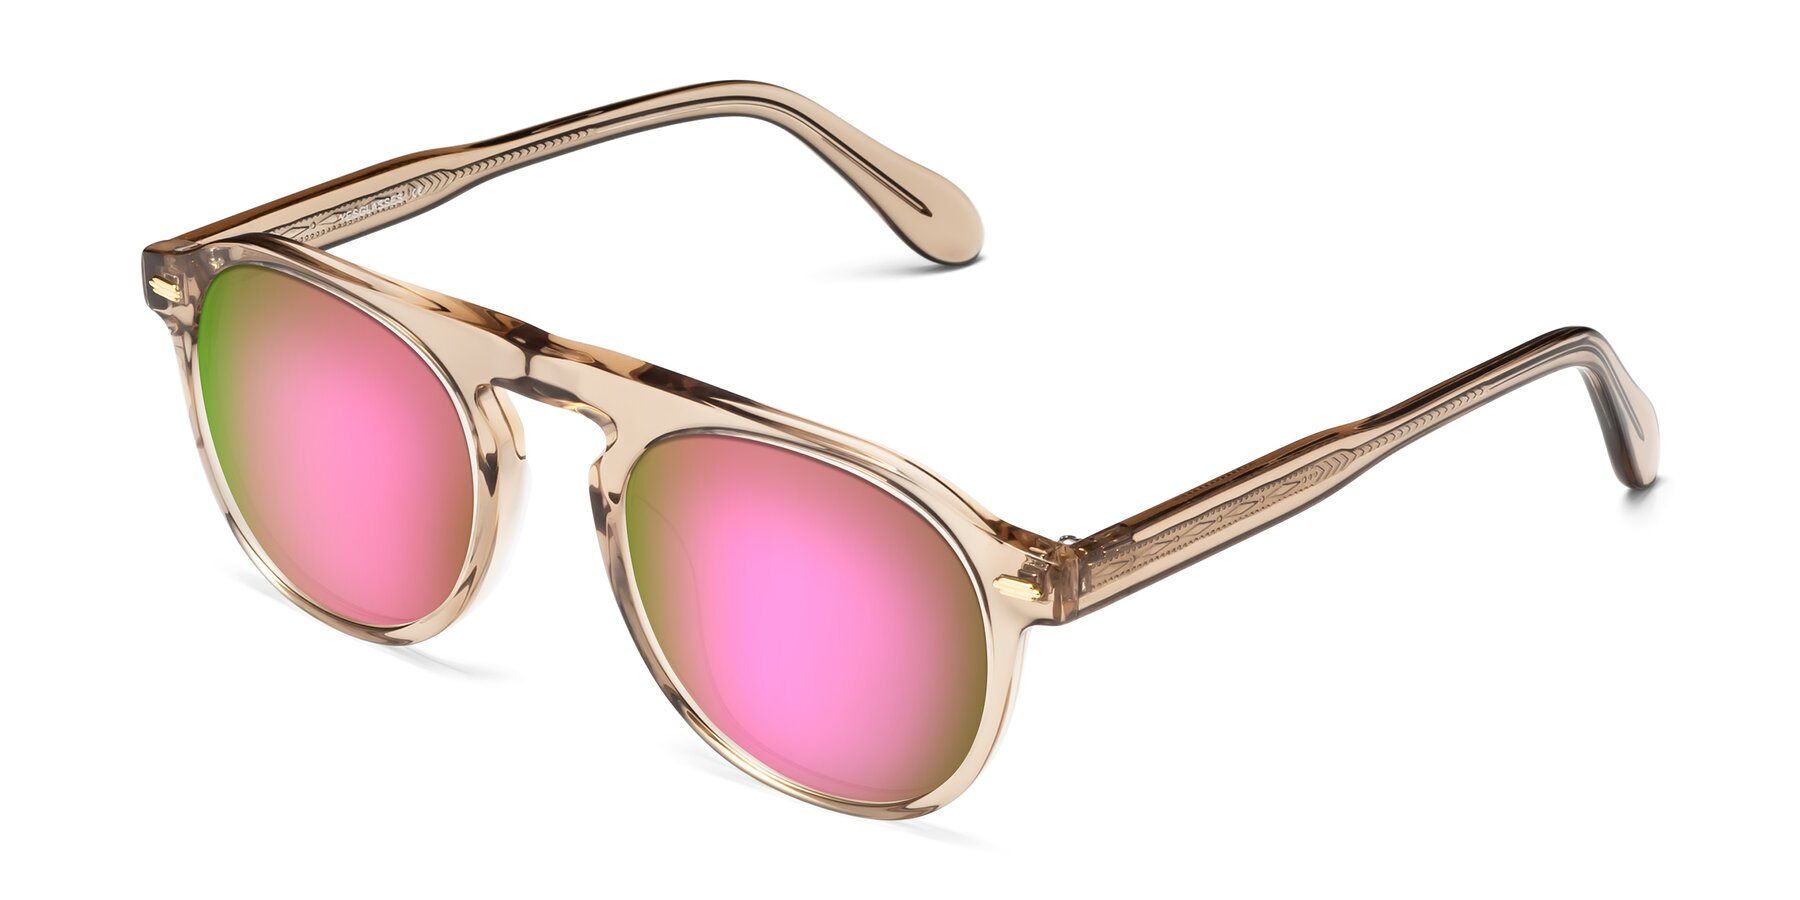 Angle of Mufasa in light Brown with Pink Mirrored Lenses